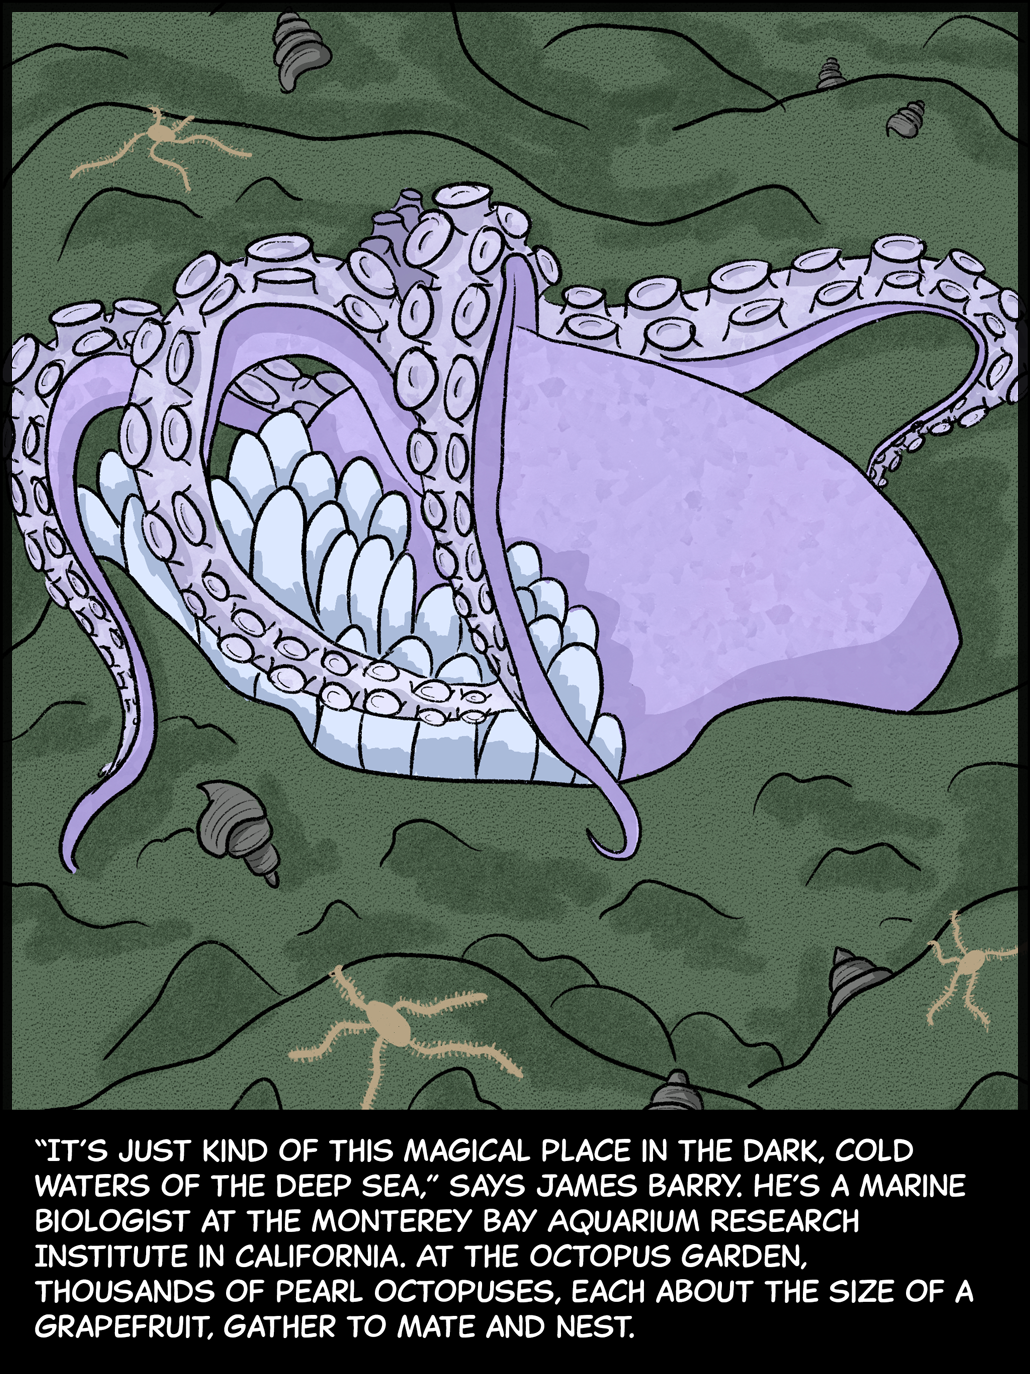 Image: A purple octopus rests upside-down on the seafloor with her arms wrapped around herself and a cluster of white, sausage-shaped eggs beside her. Text (below image): “It’s just kind of this magical place in the dark, cold waters of the deep sea,” says James Barry. He’s a marine biologist at the Monterey Bay Aquarium Research Institute in California. At the Octopus Garden, thousands of pearl octopuses, each about the size of a grapefruit, gather to mate and nest.